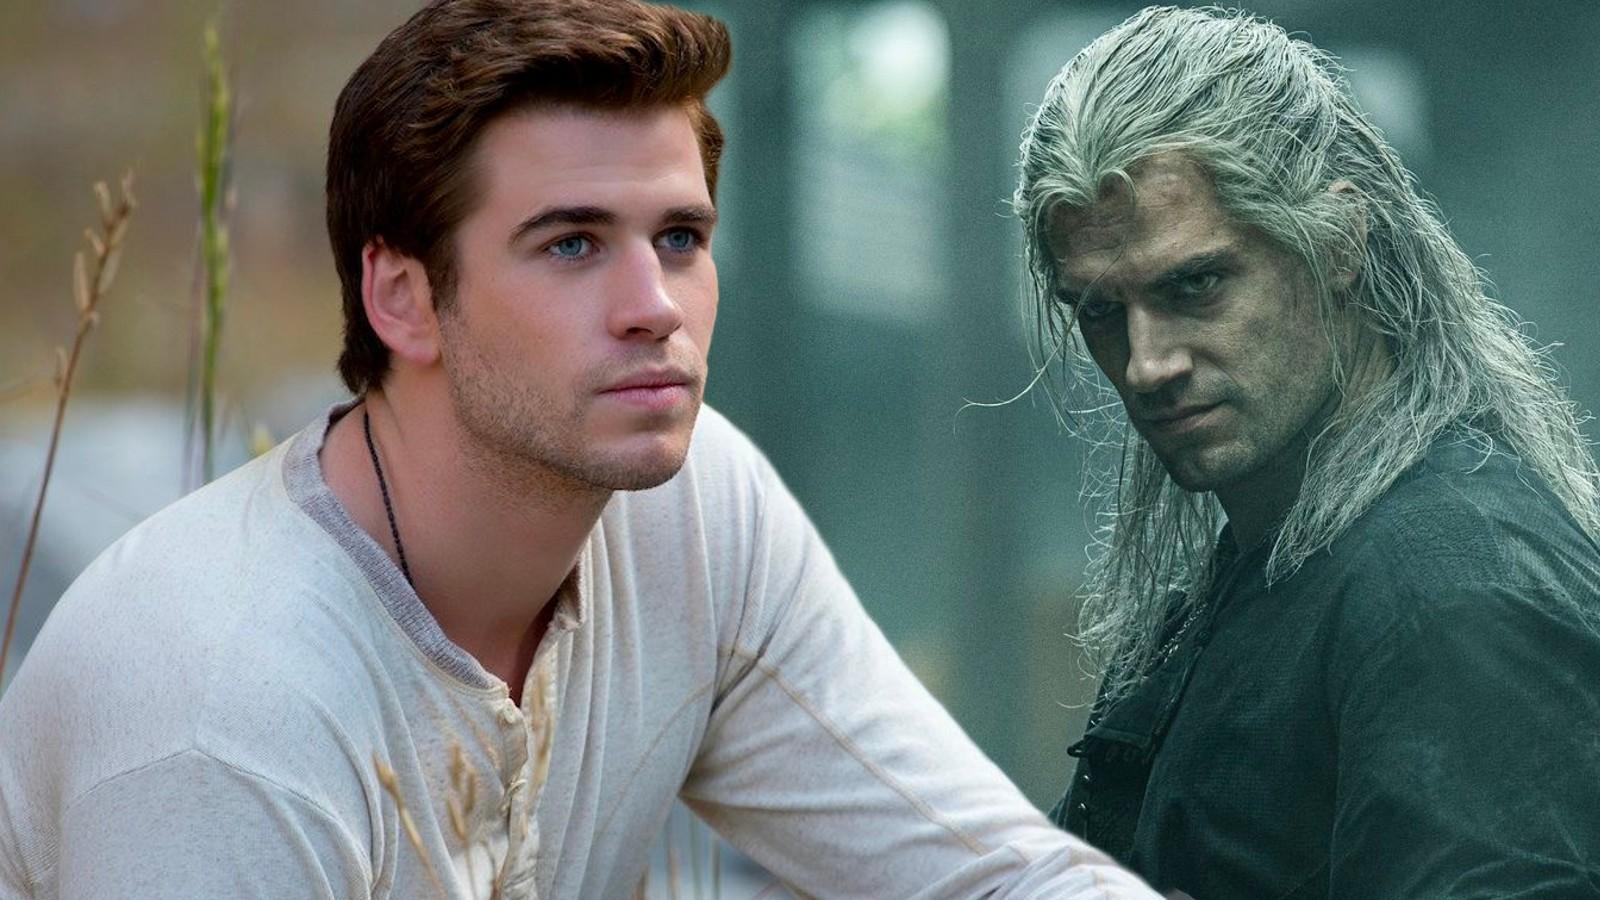 Liam Hemsworth in The Hunger Games and Henry Cavill in The Witcher